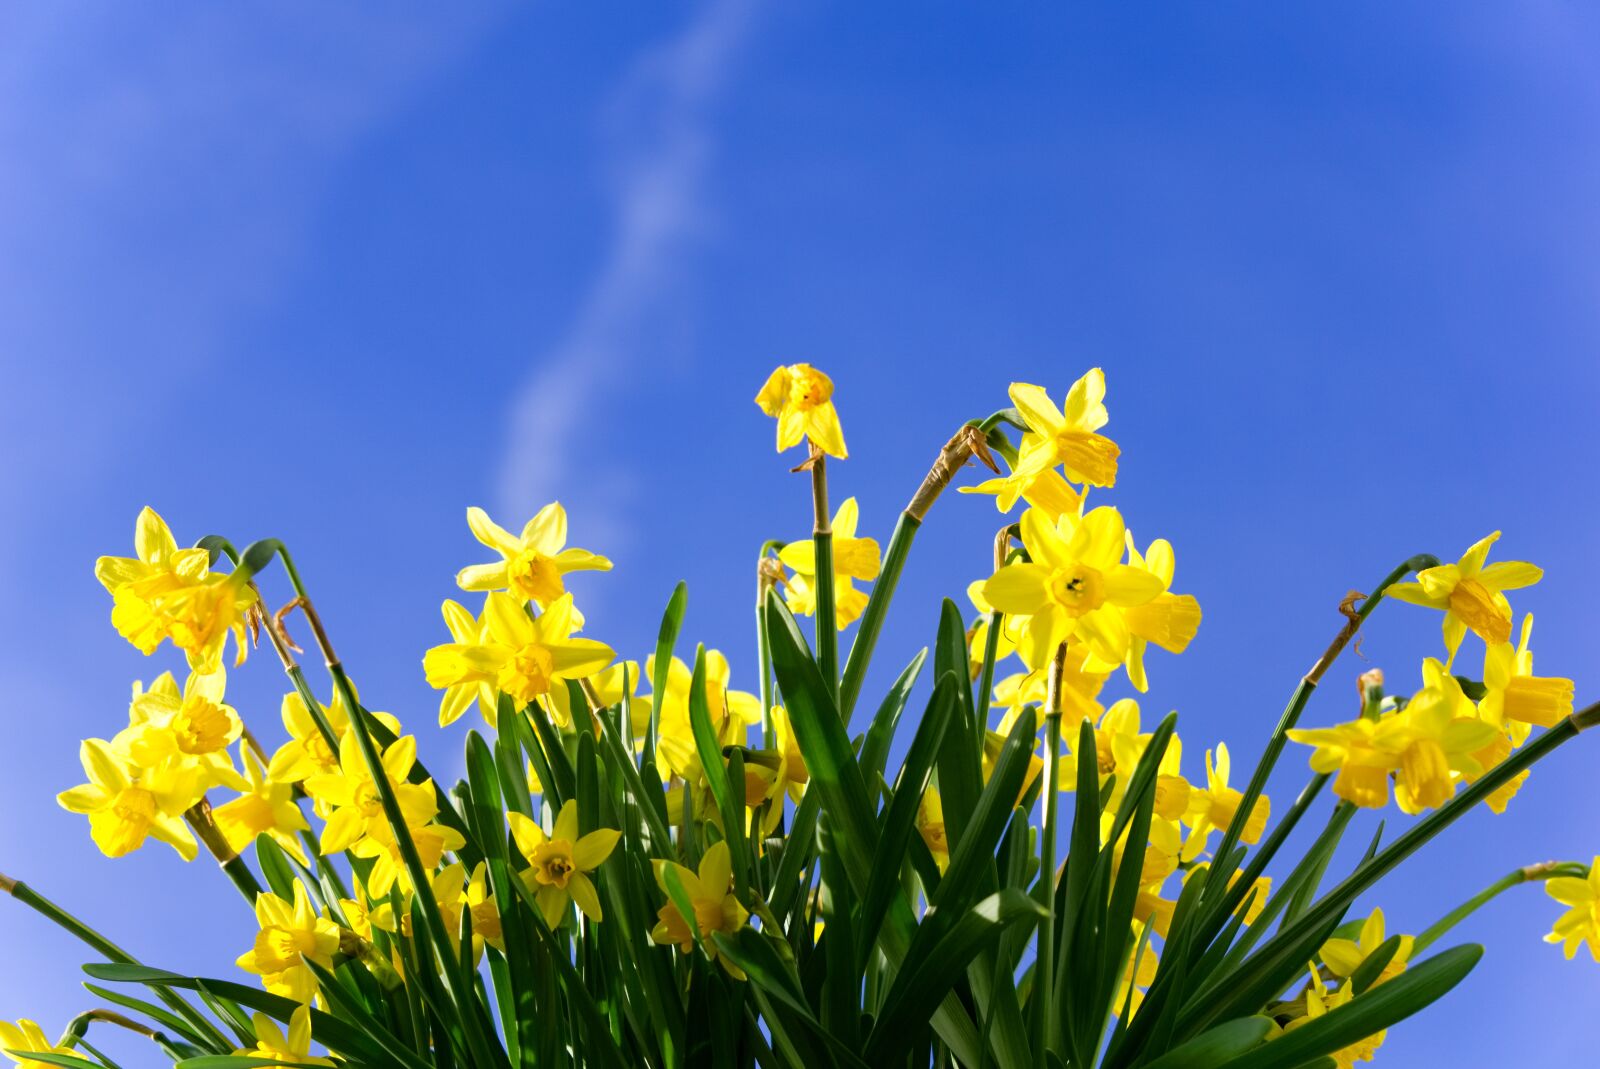 Sony a6000 sample photo. Daffodils, early bloomer, flower photography